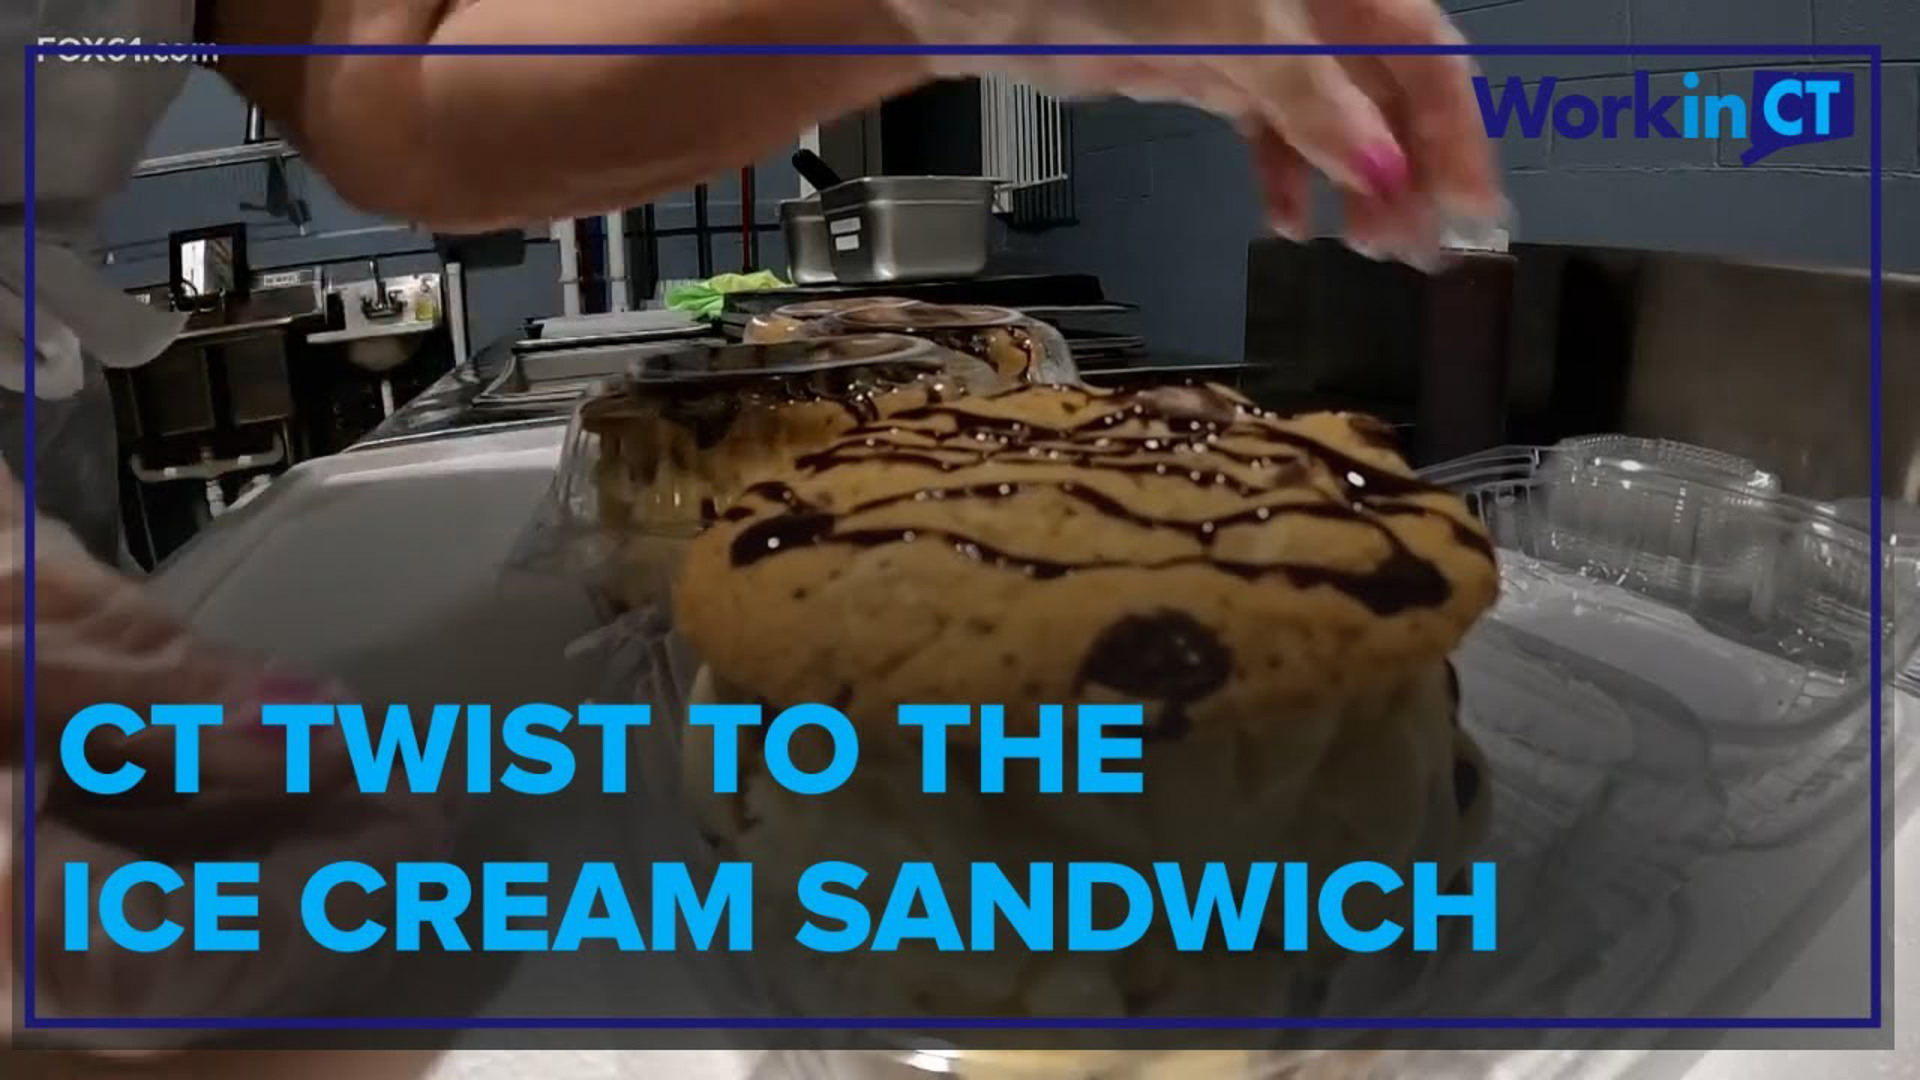 The ice cream sandwiches are sold across the state and beyond.